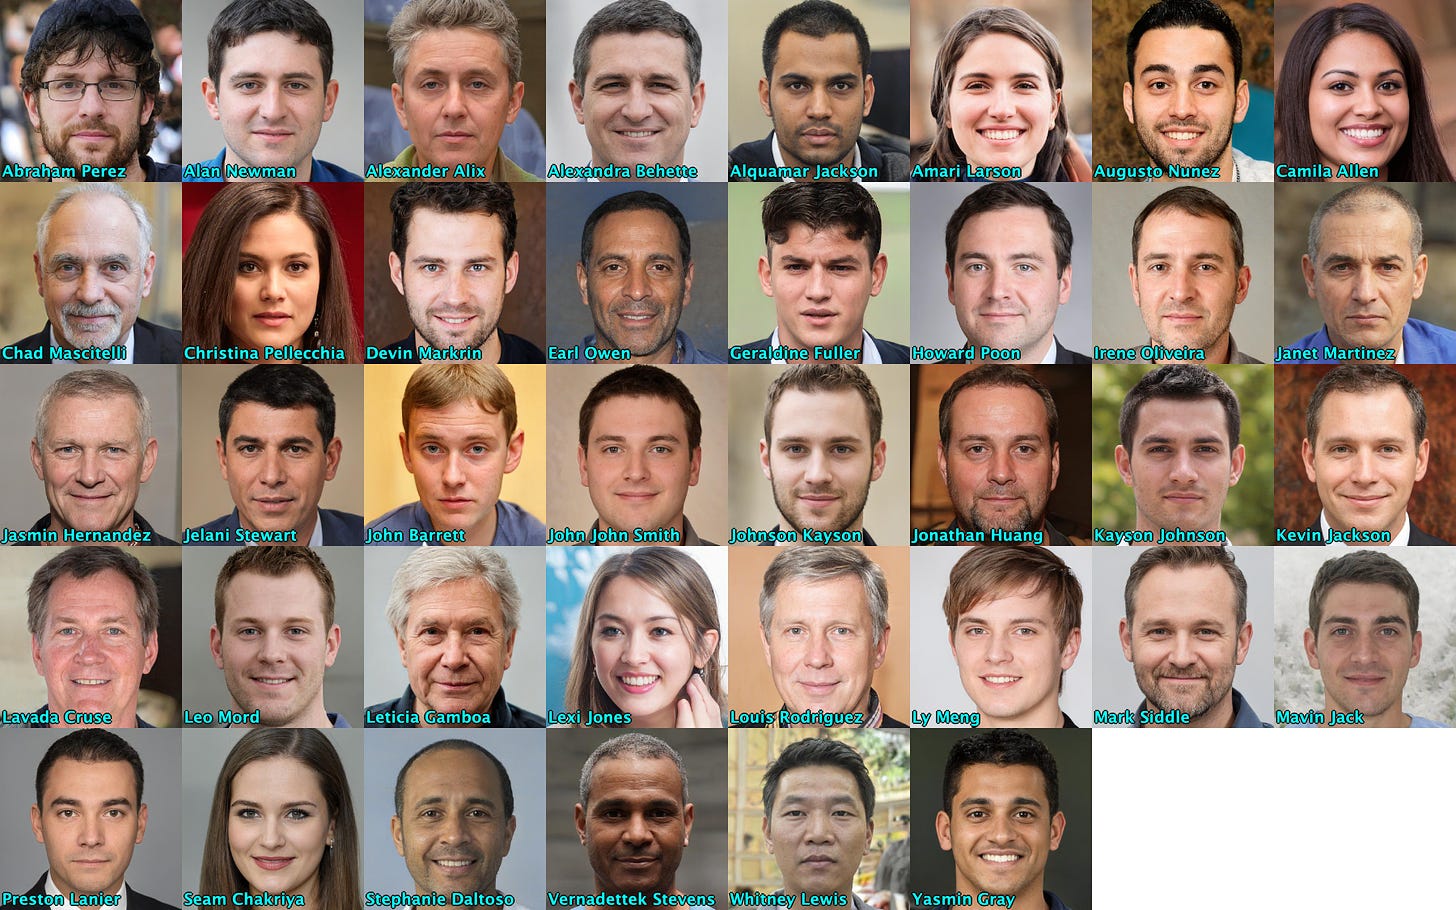 the profile photos of the 38 accounts in the network, all GAN-generated faces